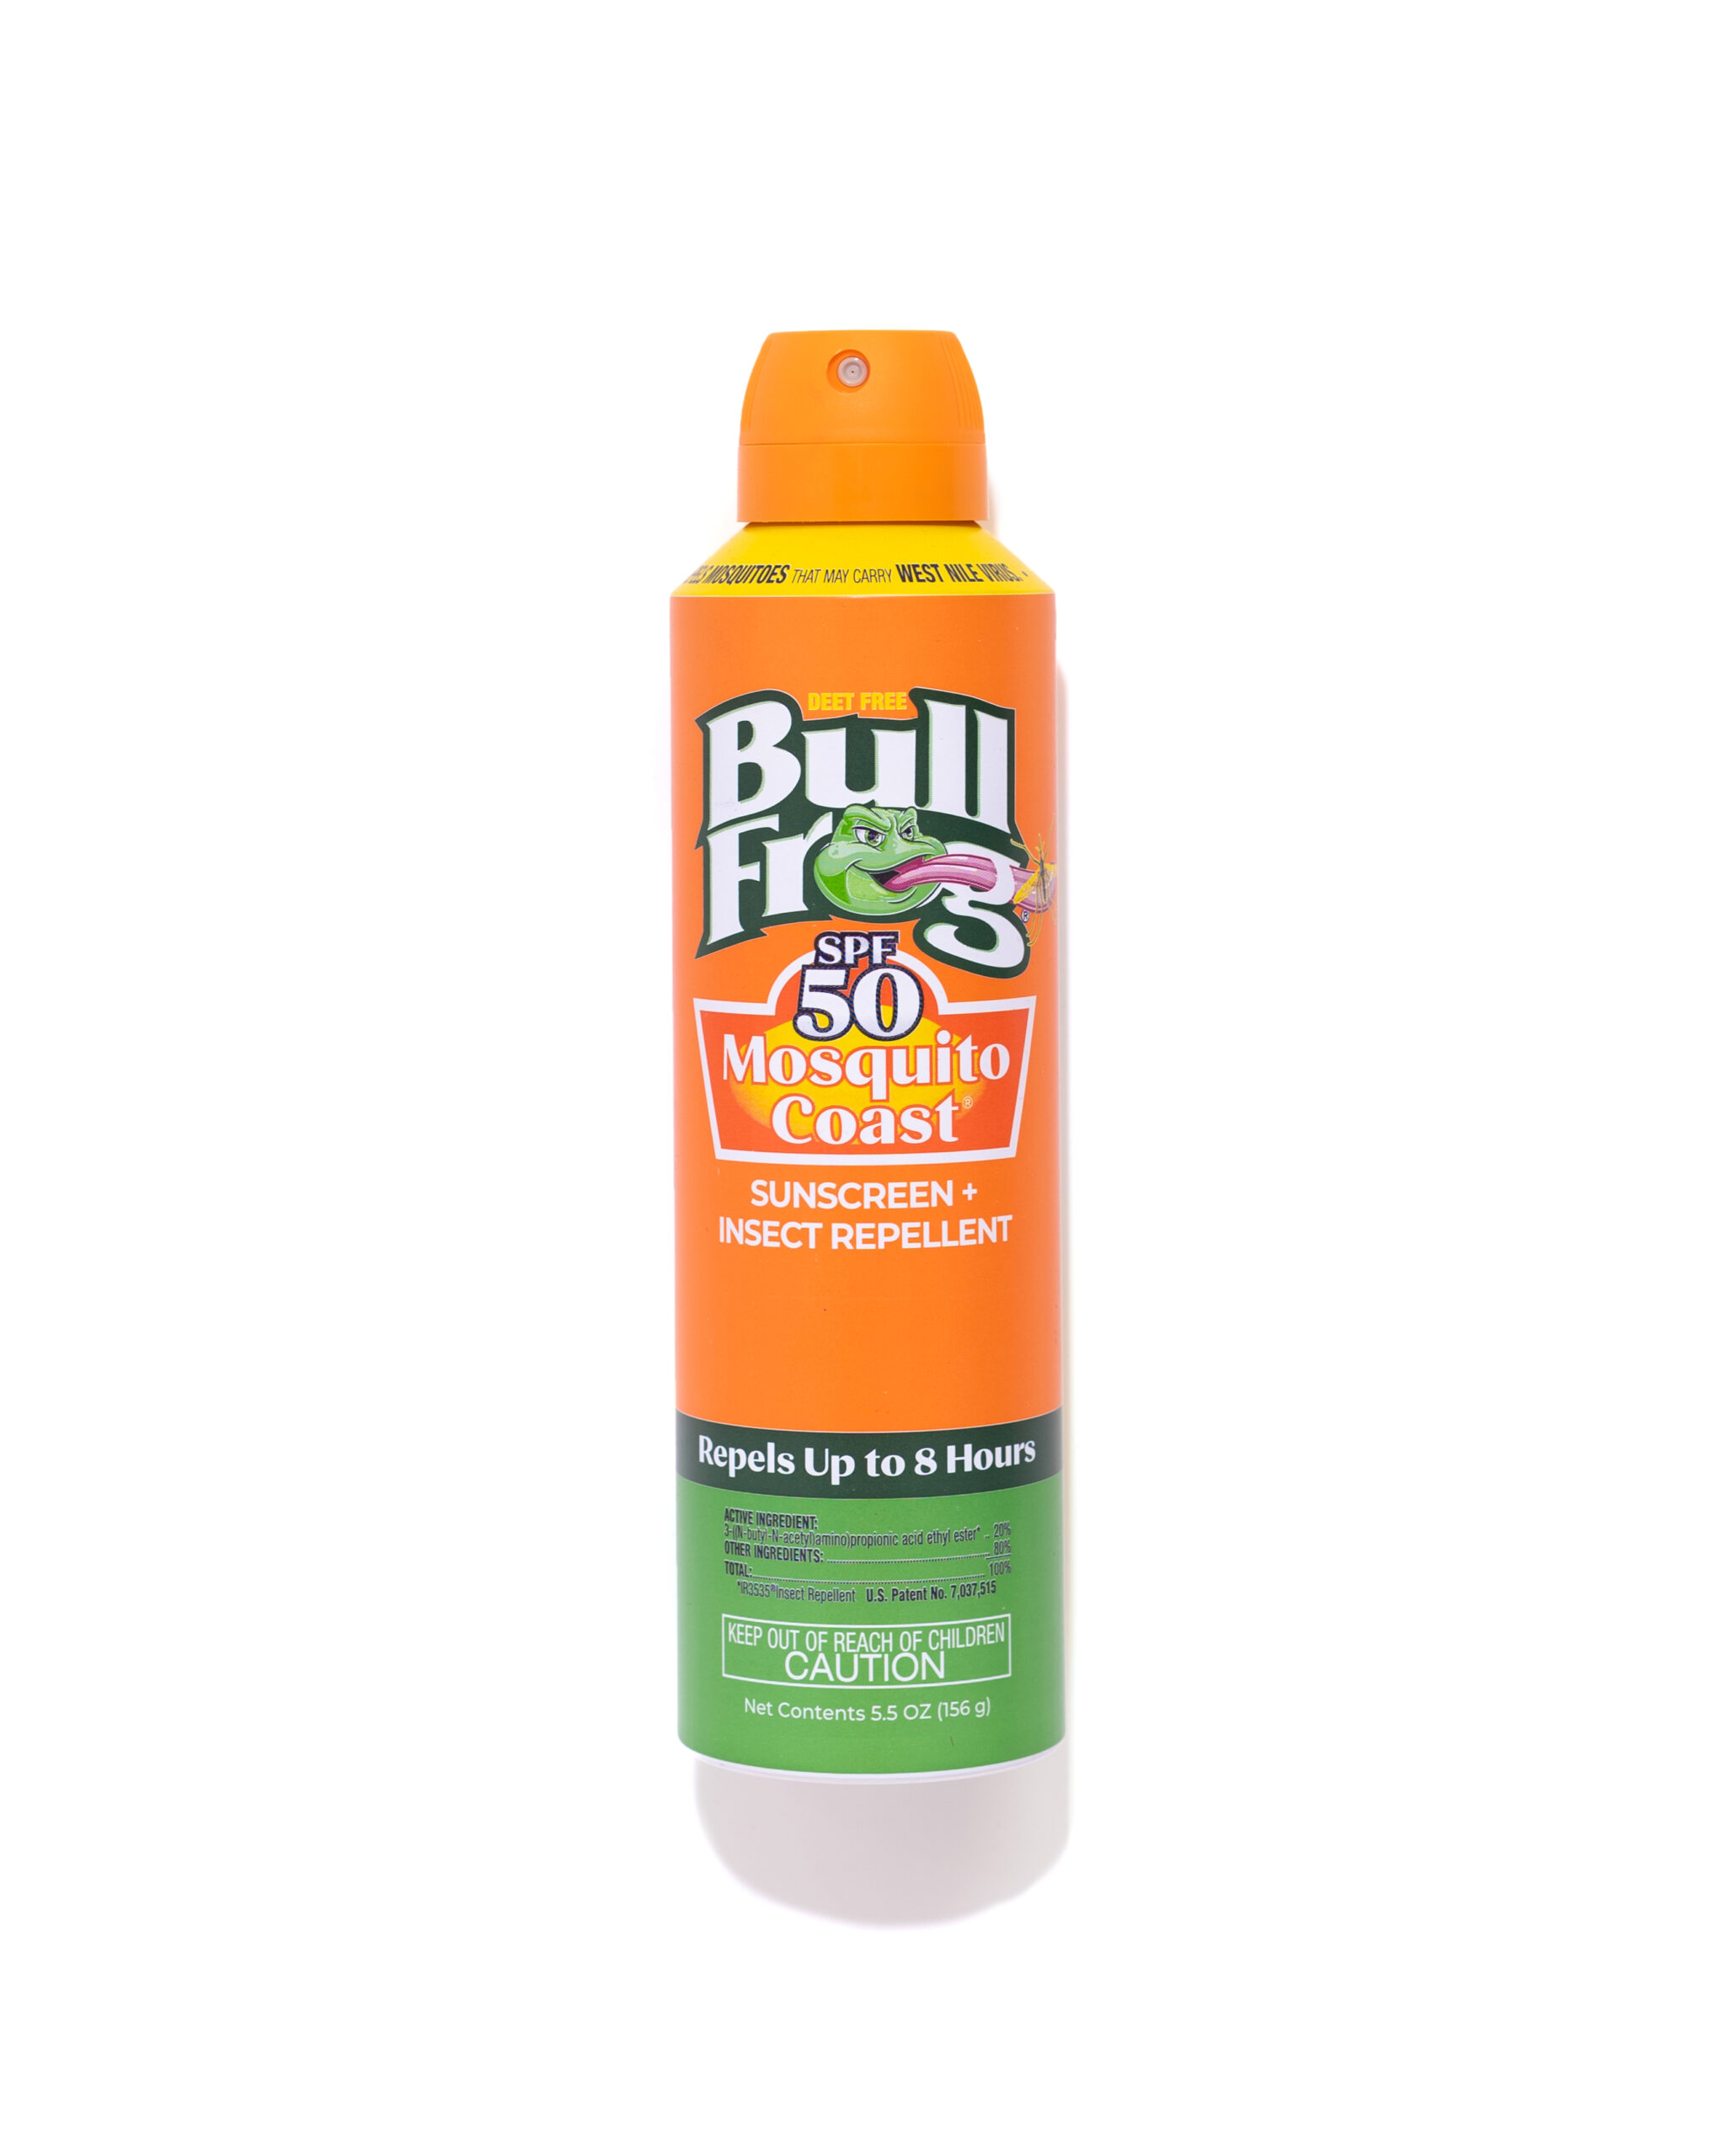 BULLFROG SUNSCREEN & INSECT REPELLENT